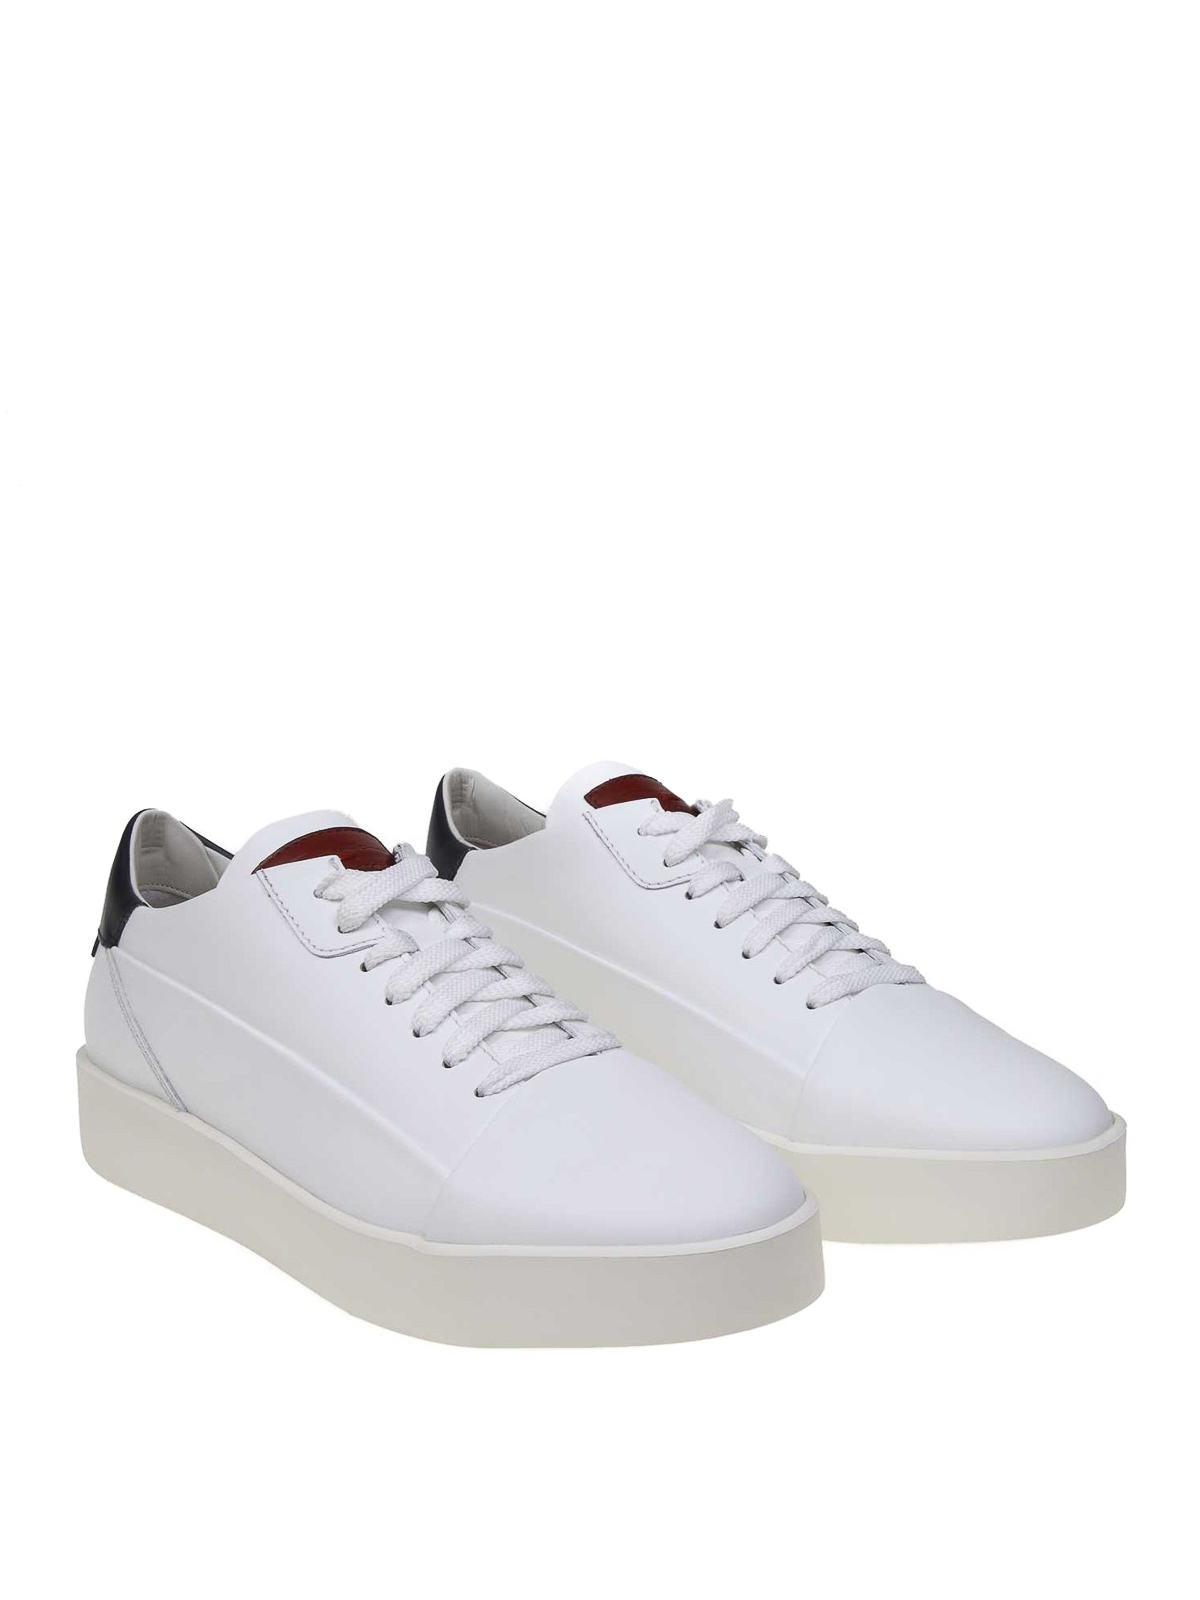 White leather cap toe sneakers 